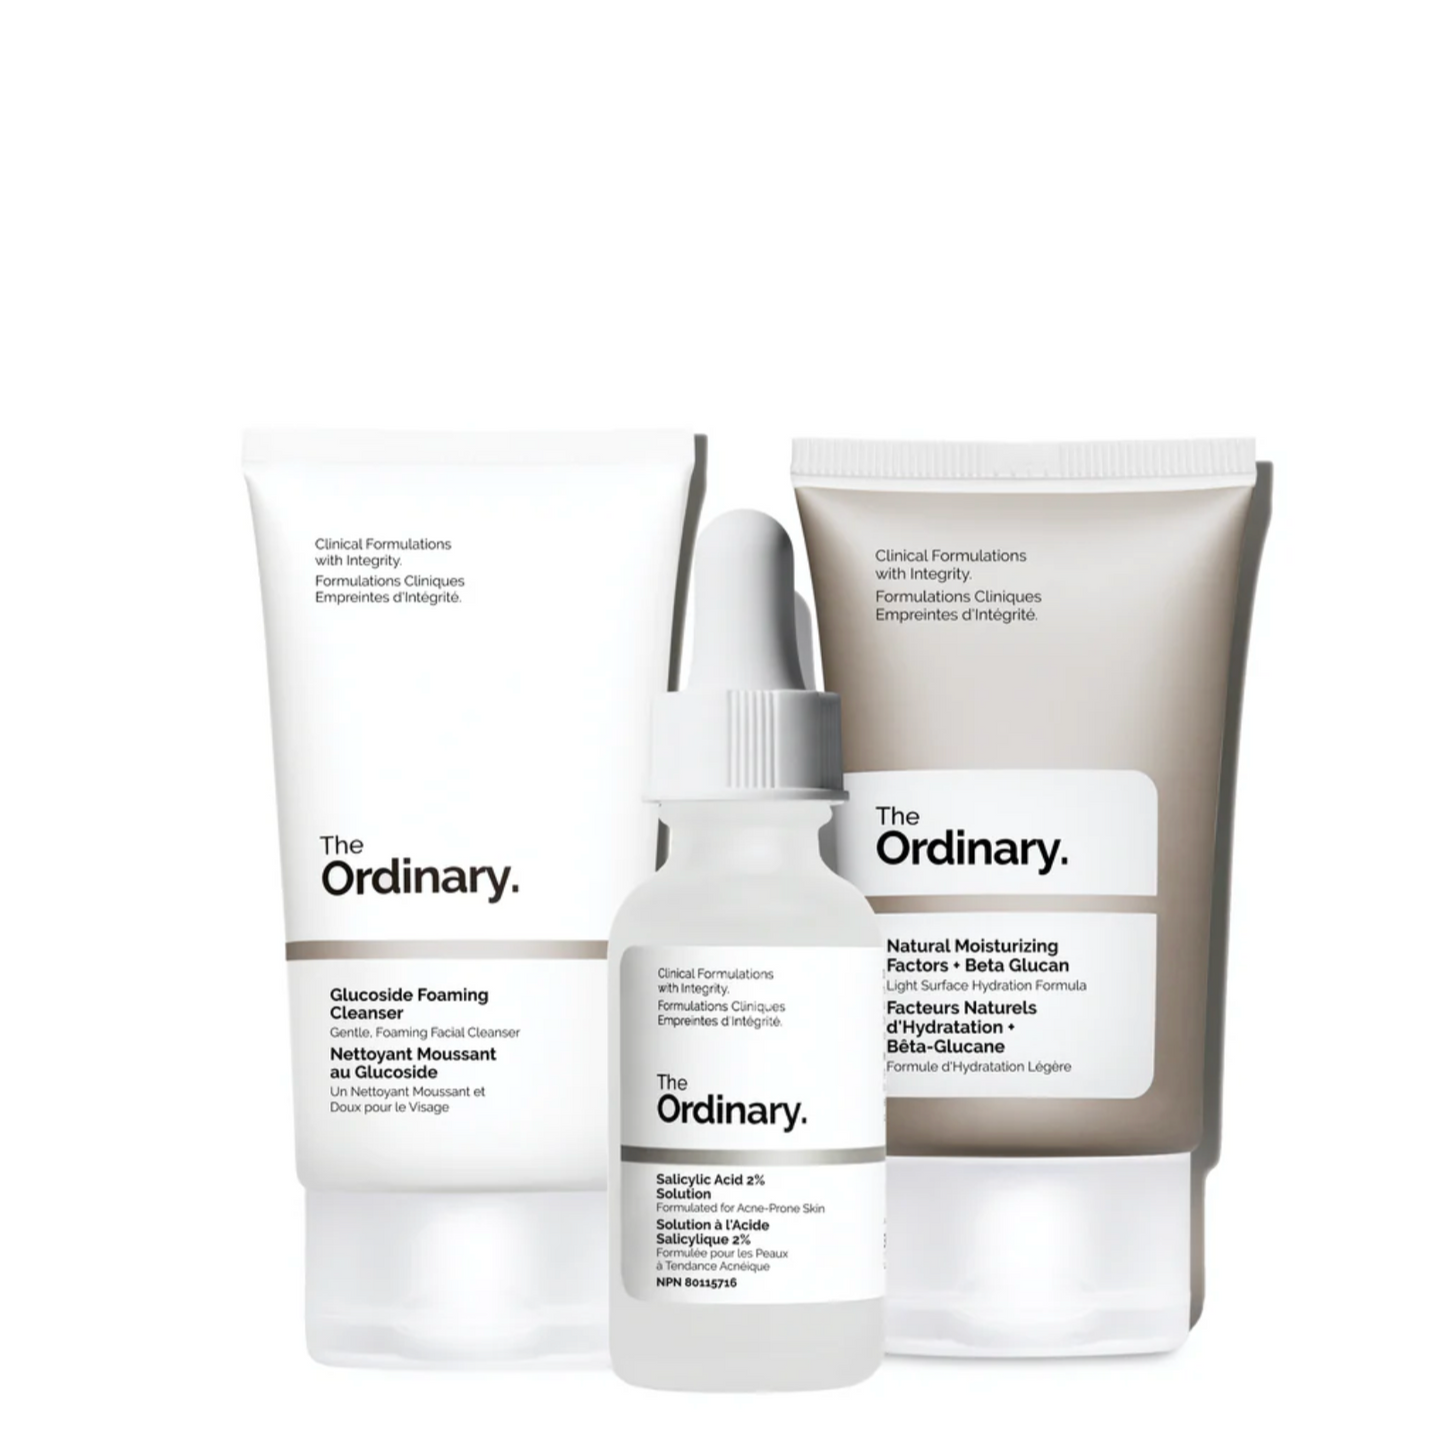 The Ordinary Acne 3-Pack TrendSets Bundle